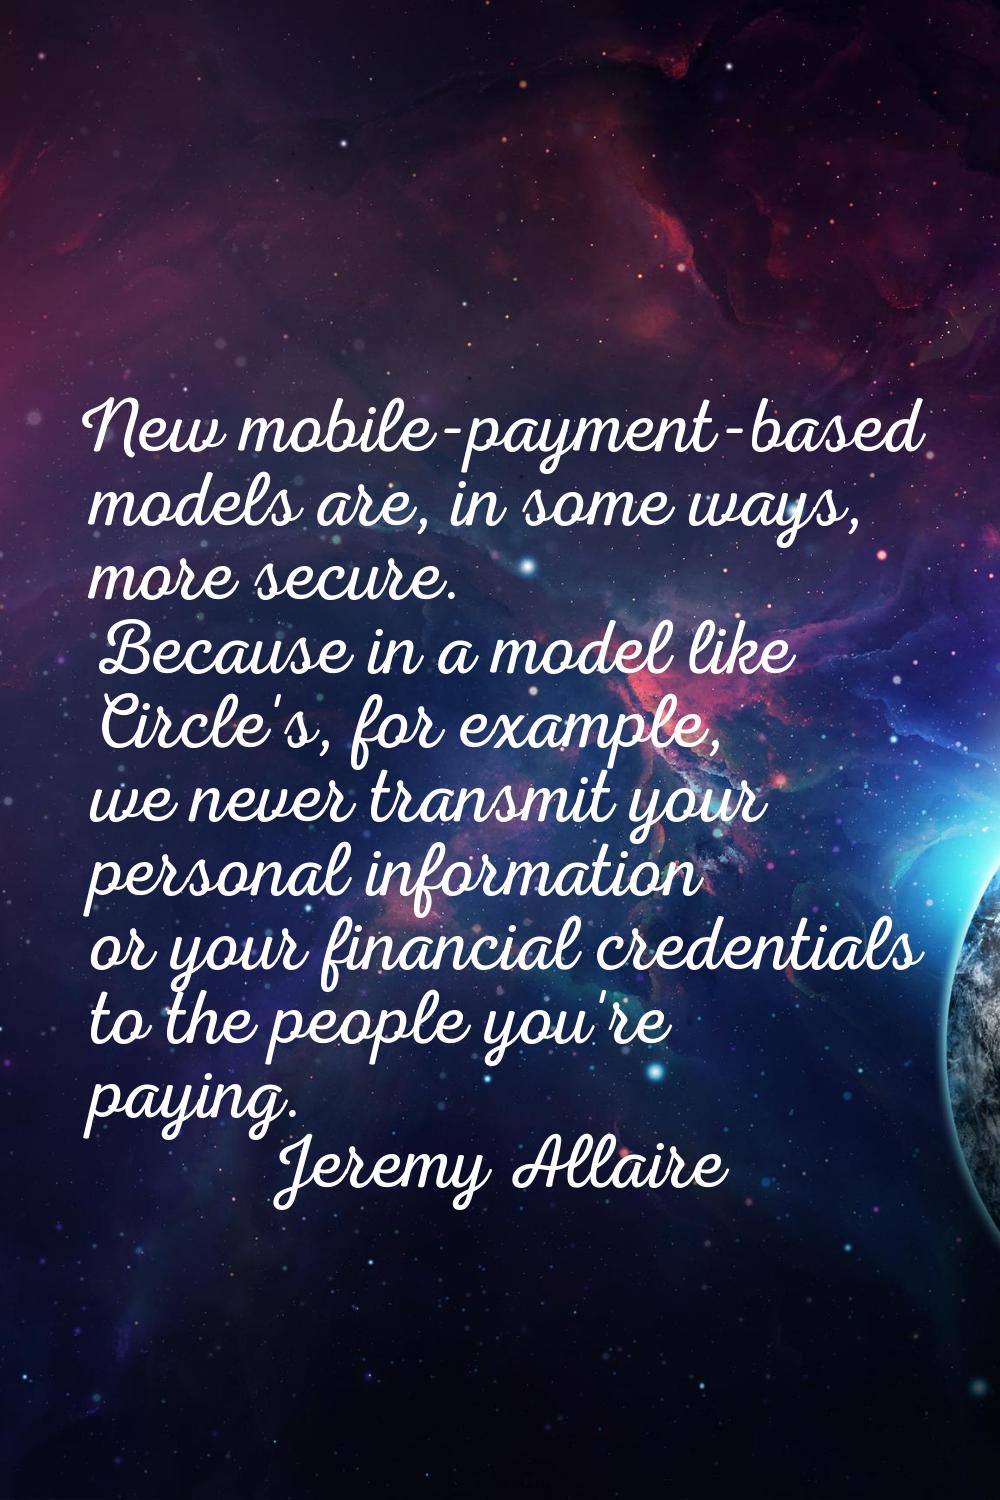 New mobile-payment-based models are, in some ways, more secure. Because in a model like Circle's, f